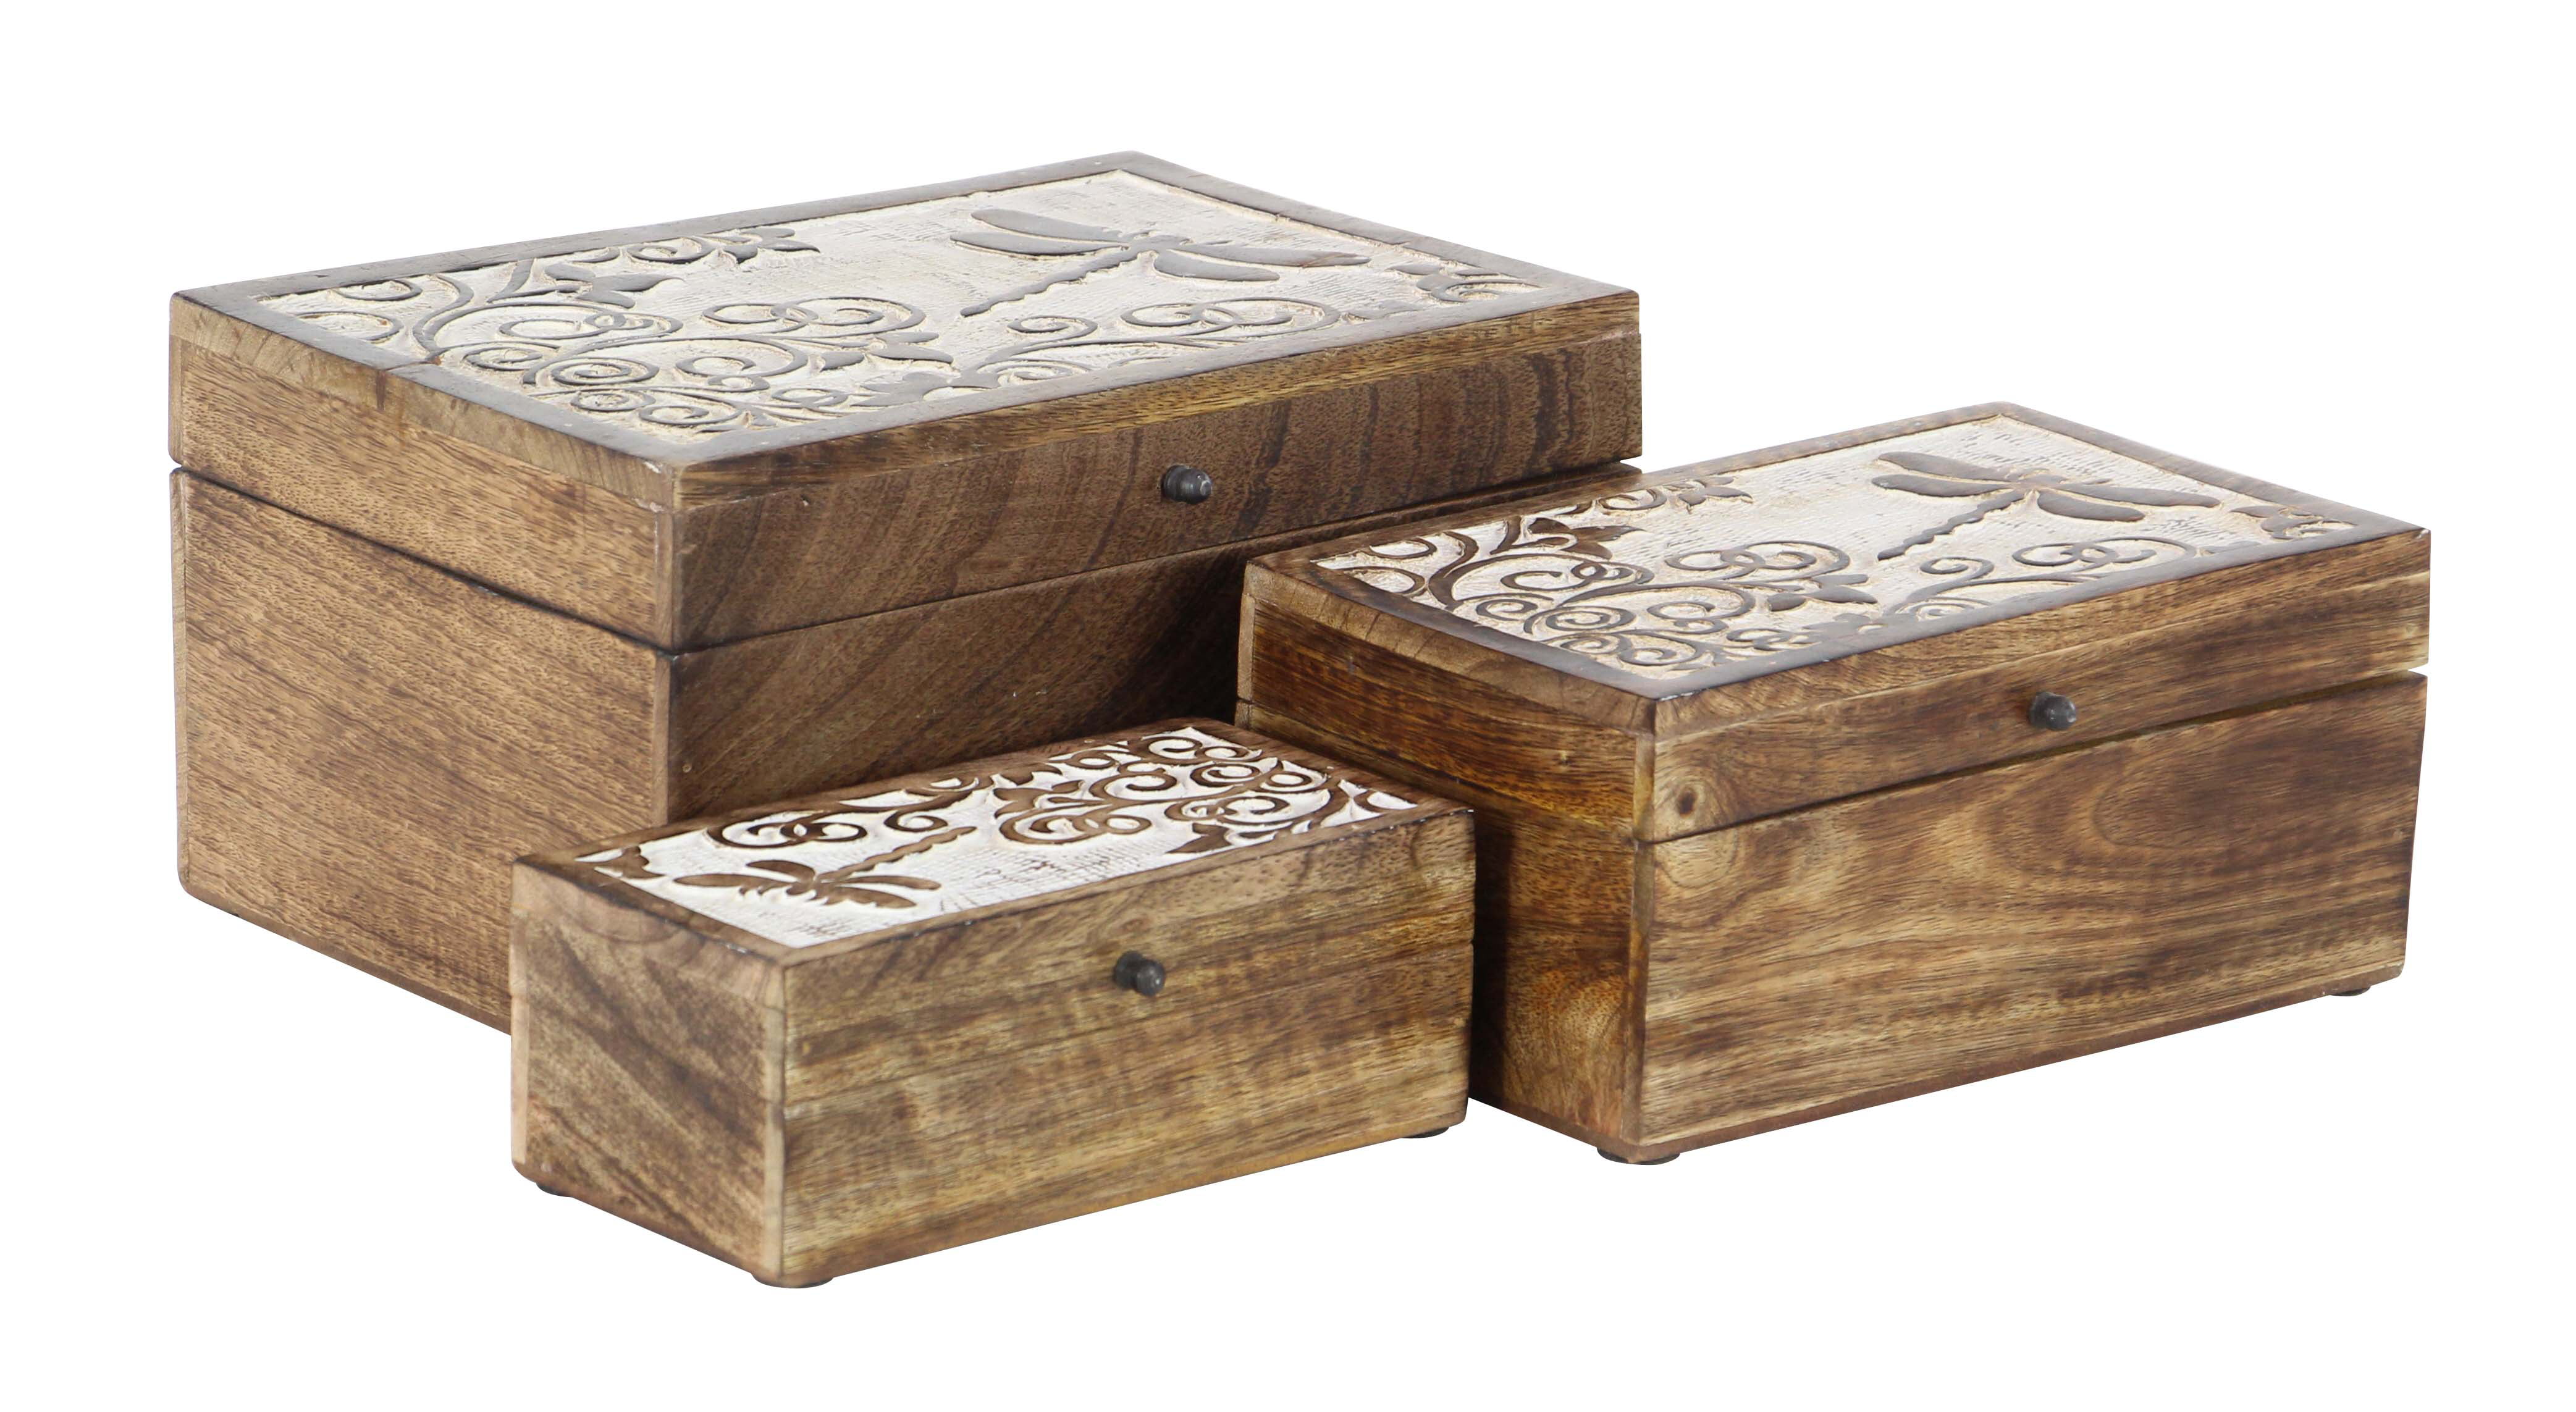 Decmode Set Of 3 Rustic Decor Mango Wood Storage Boxes With Carved